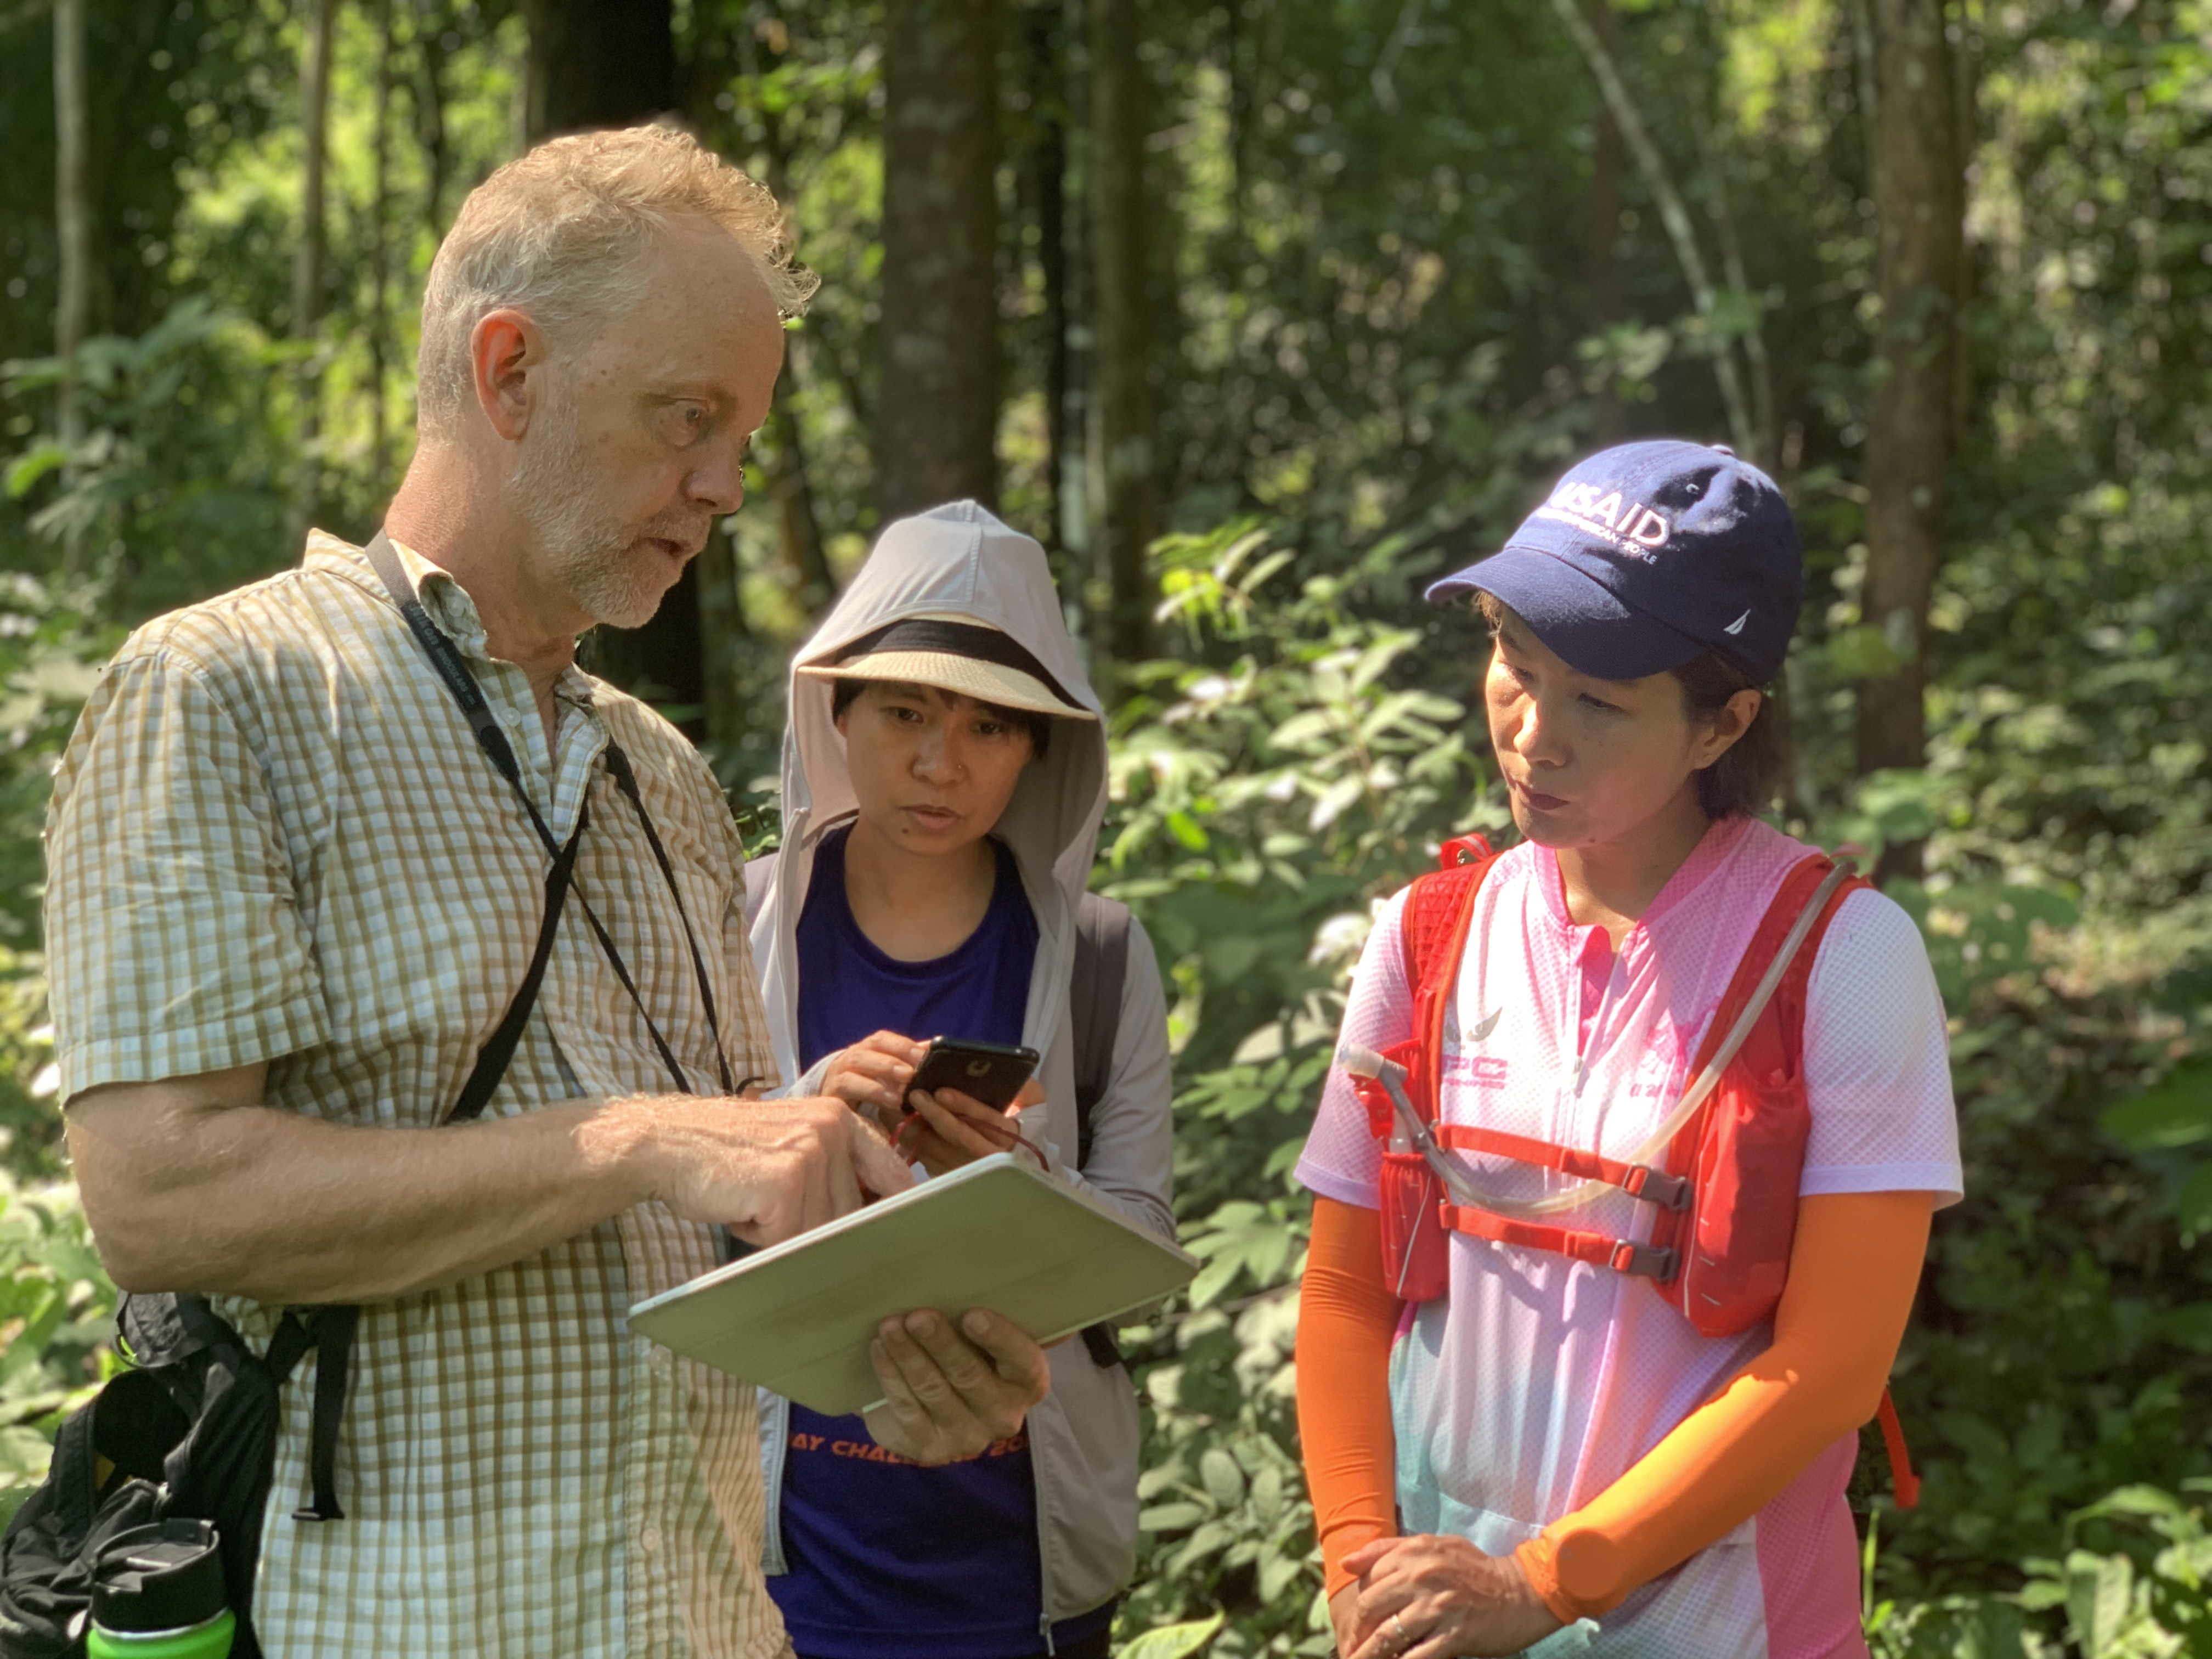 three people standing in a forest reviewing content on a tablet